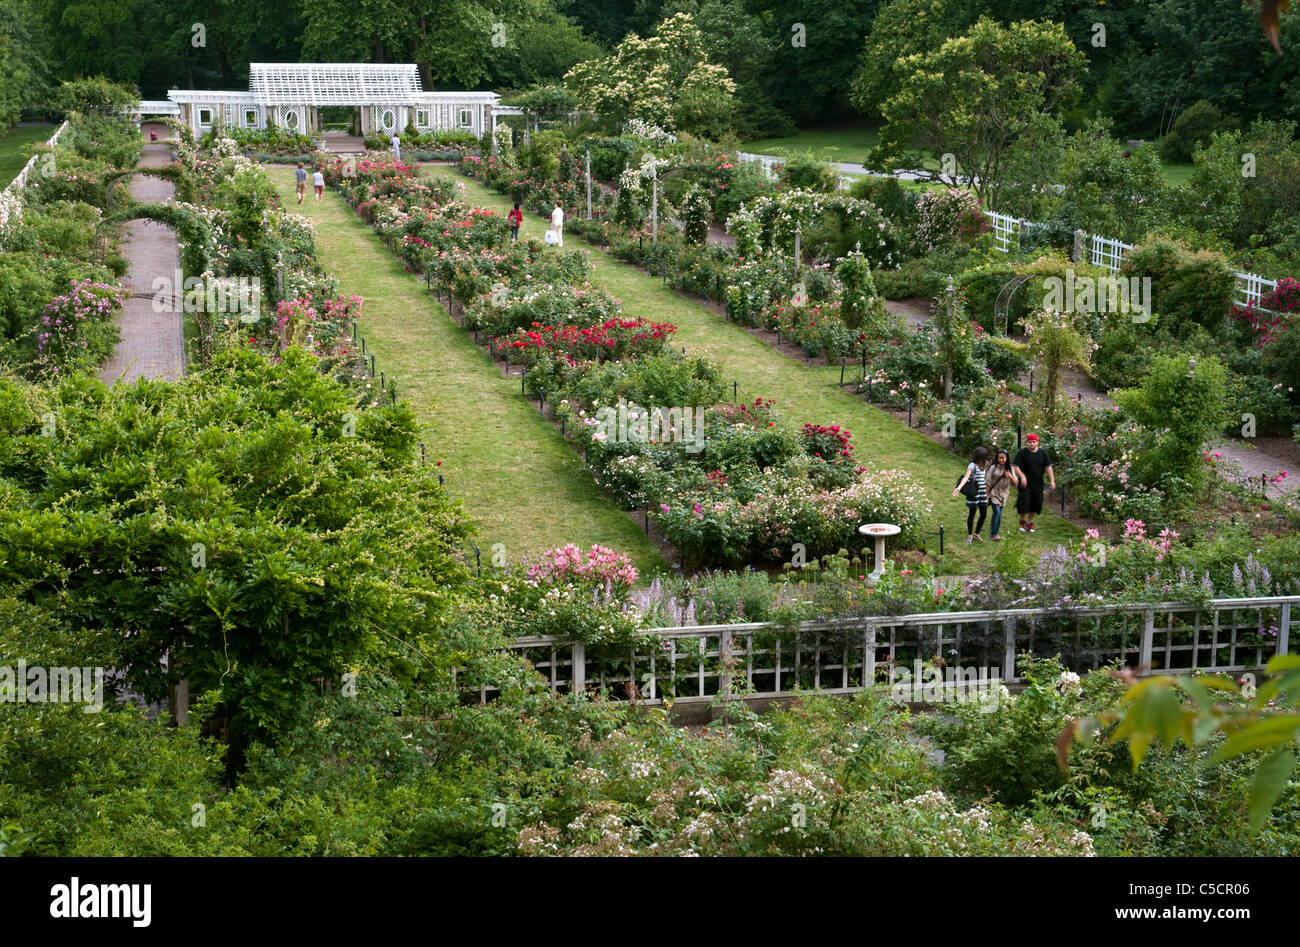 The Cranford Rose Garden at the Brooklyn Botanic Garden has over 5,000 bushes with approximately 1,400 rose varieties. Stock Photo